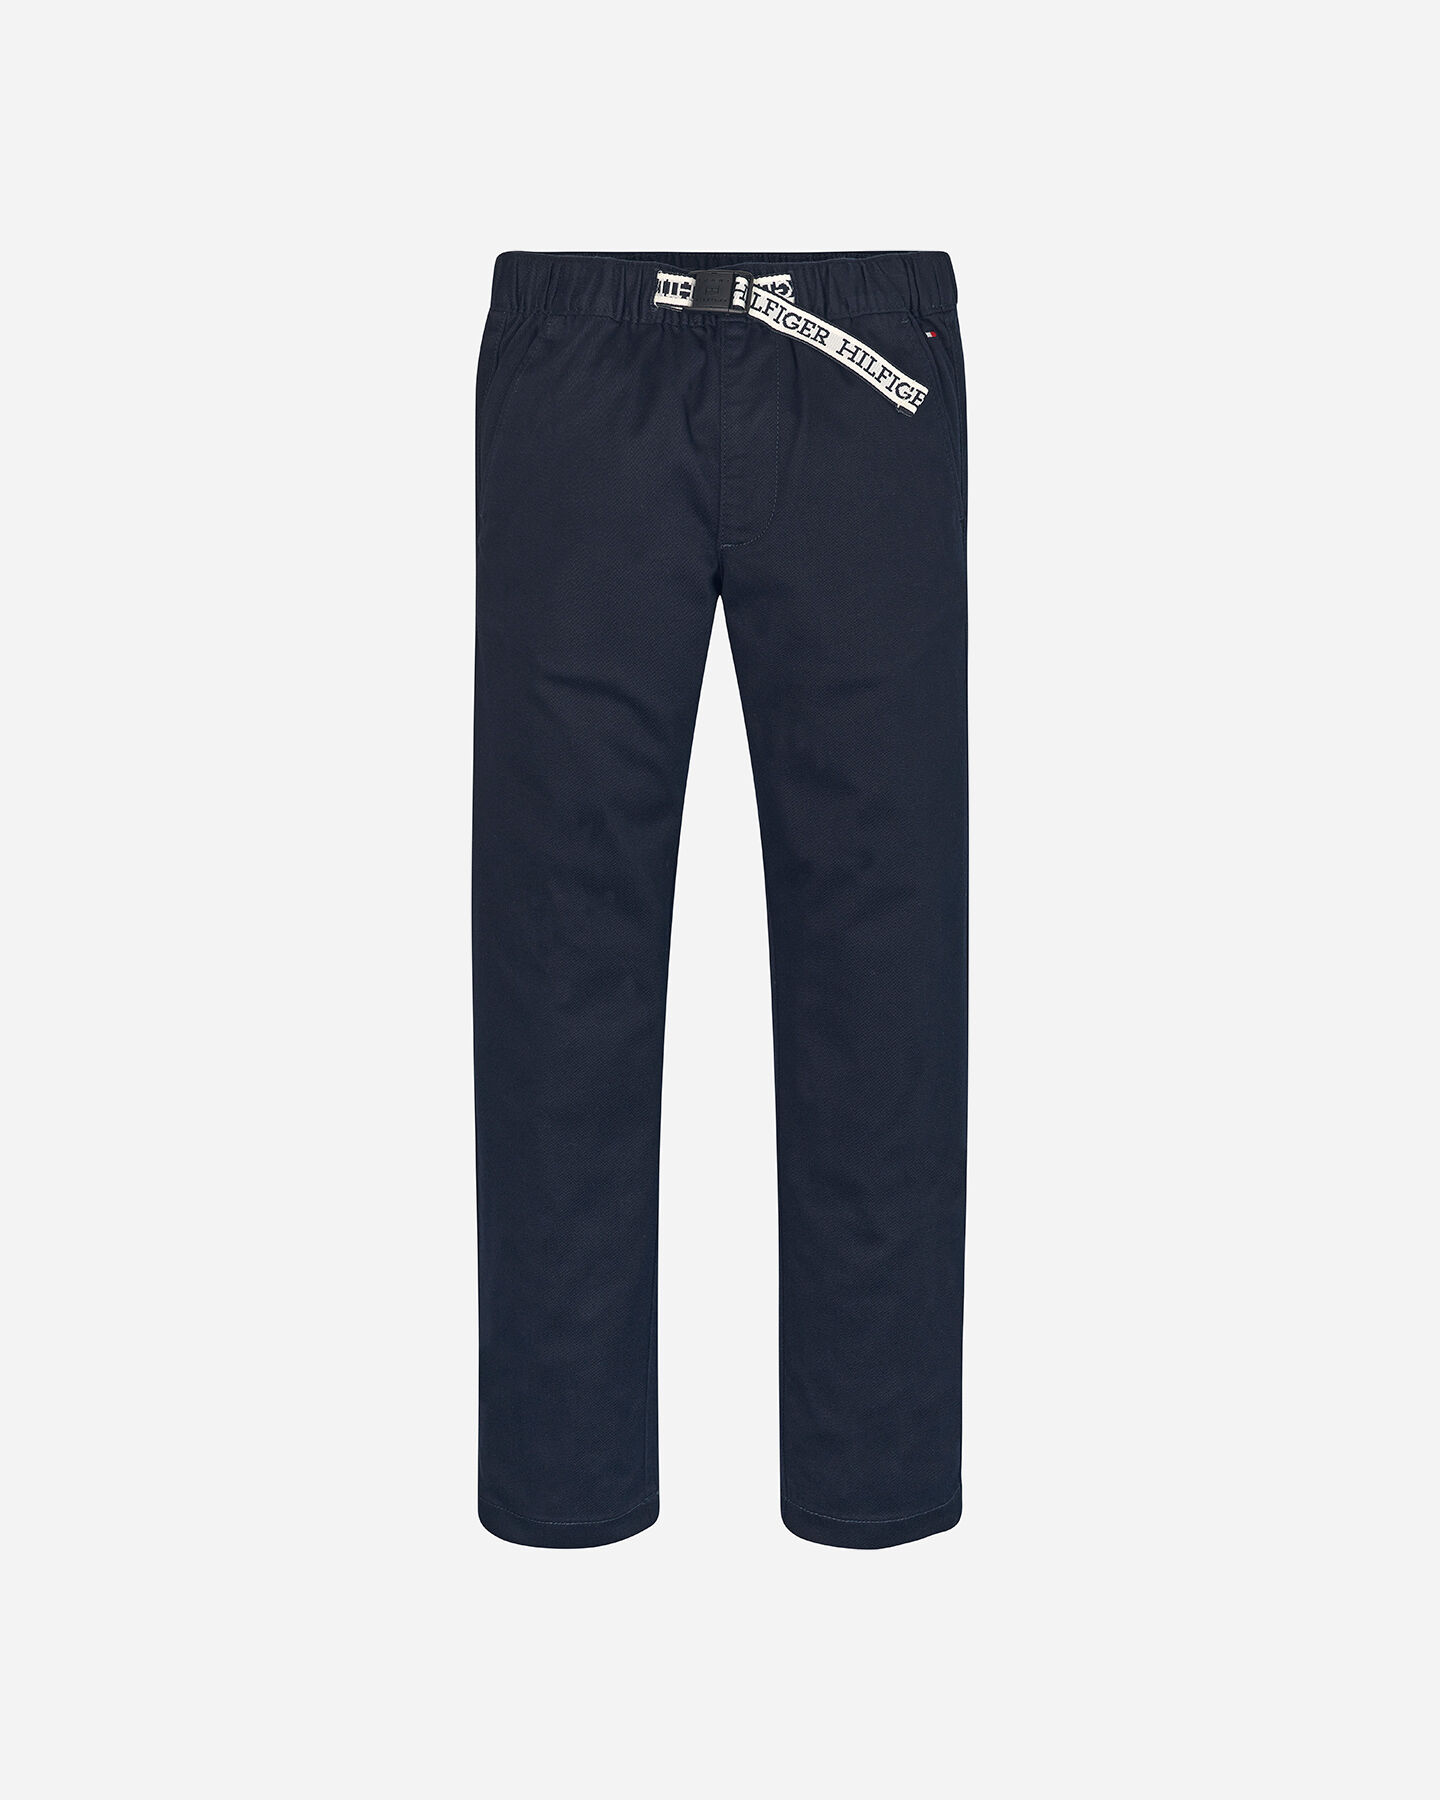  Pantalone TOMMY HILFIGER COMFORT BELTED JR S4126708|DW5|10A scatto 0